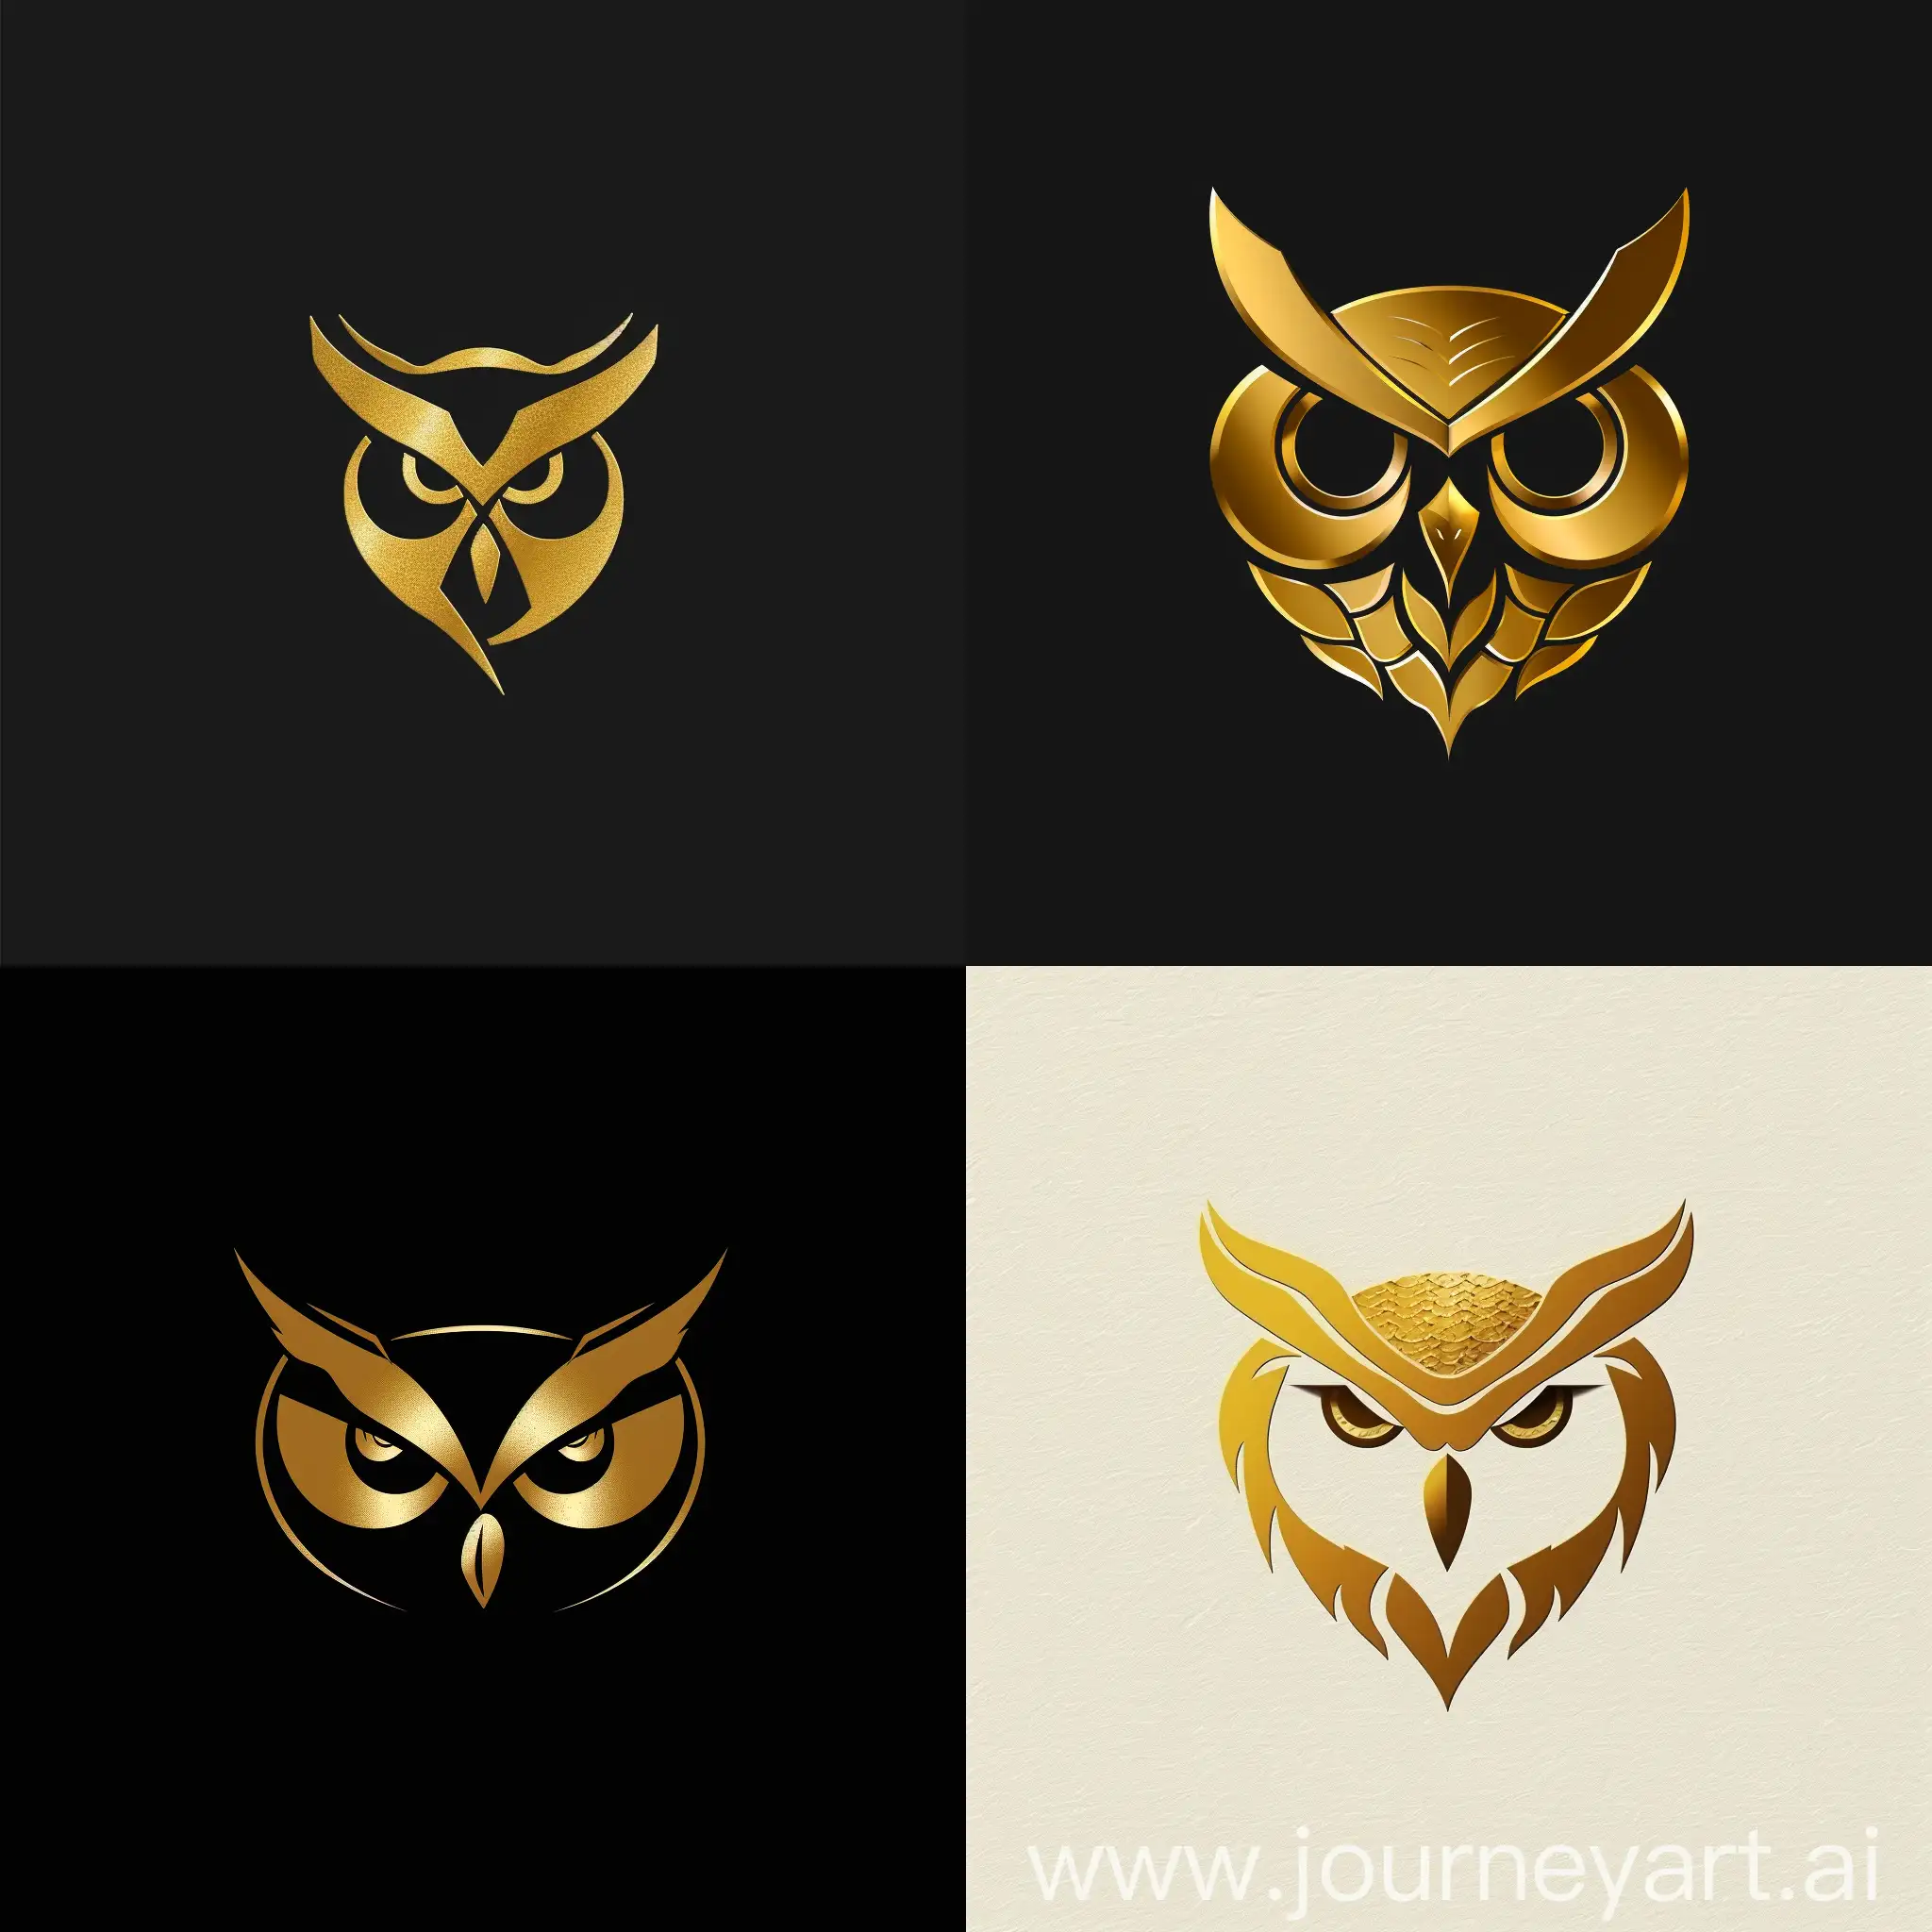 Golden-Owl-Logo-Design-with-Intricate-Details-and-Symmetrical-Patterns